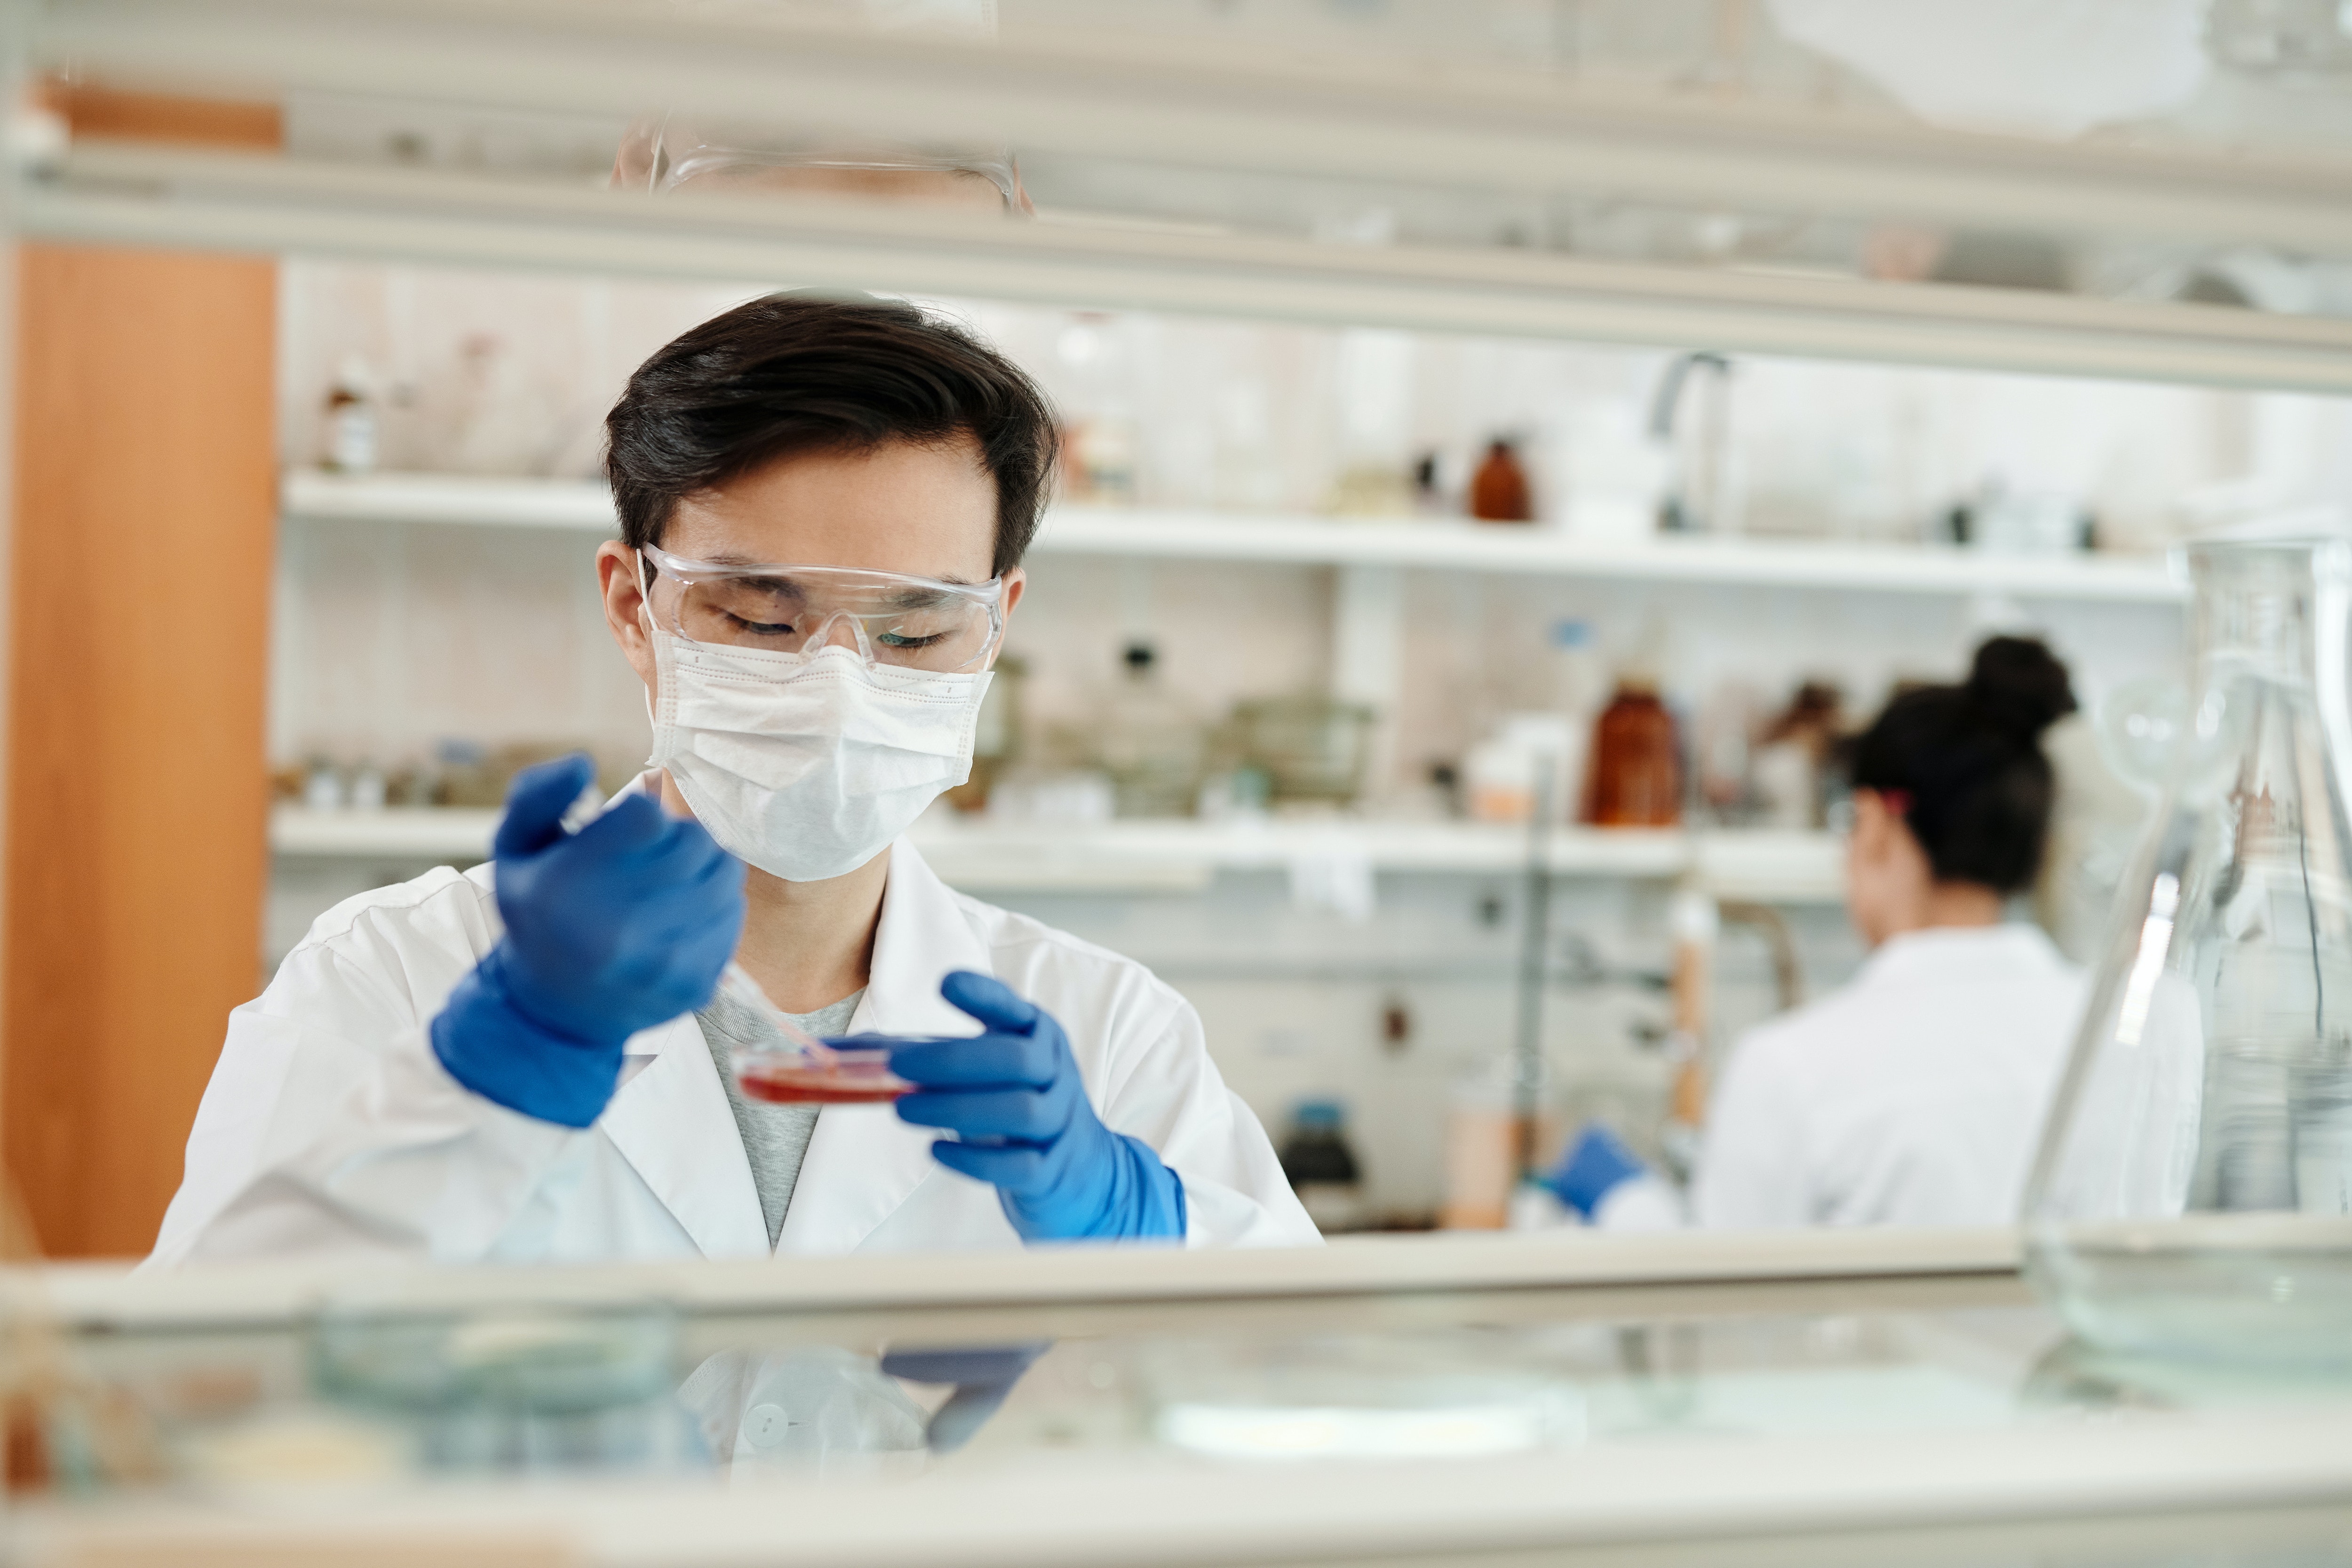 Safety rules in labs: 8 Best practices for students and researchers